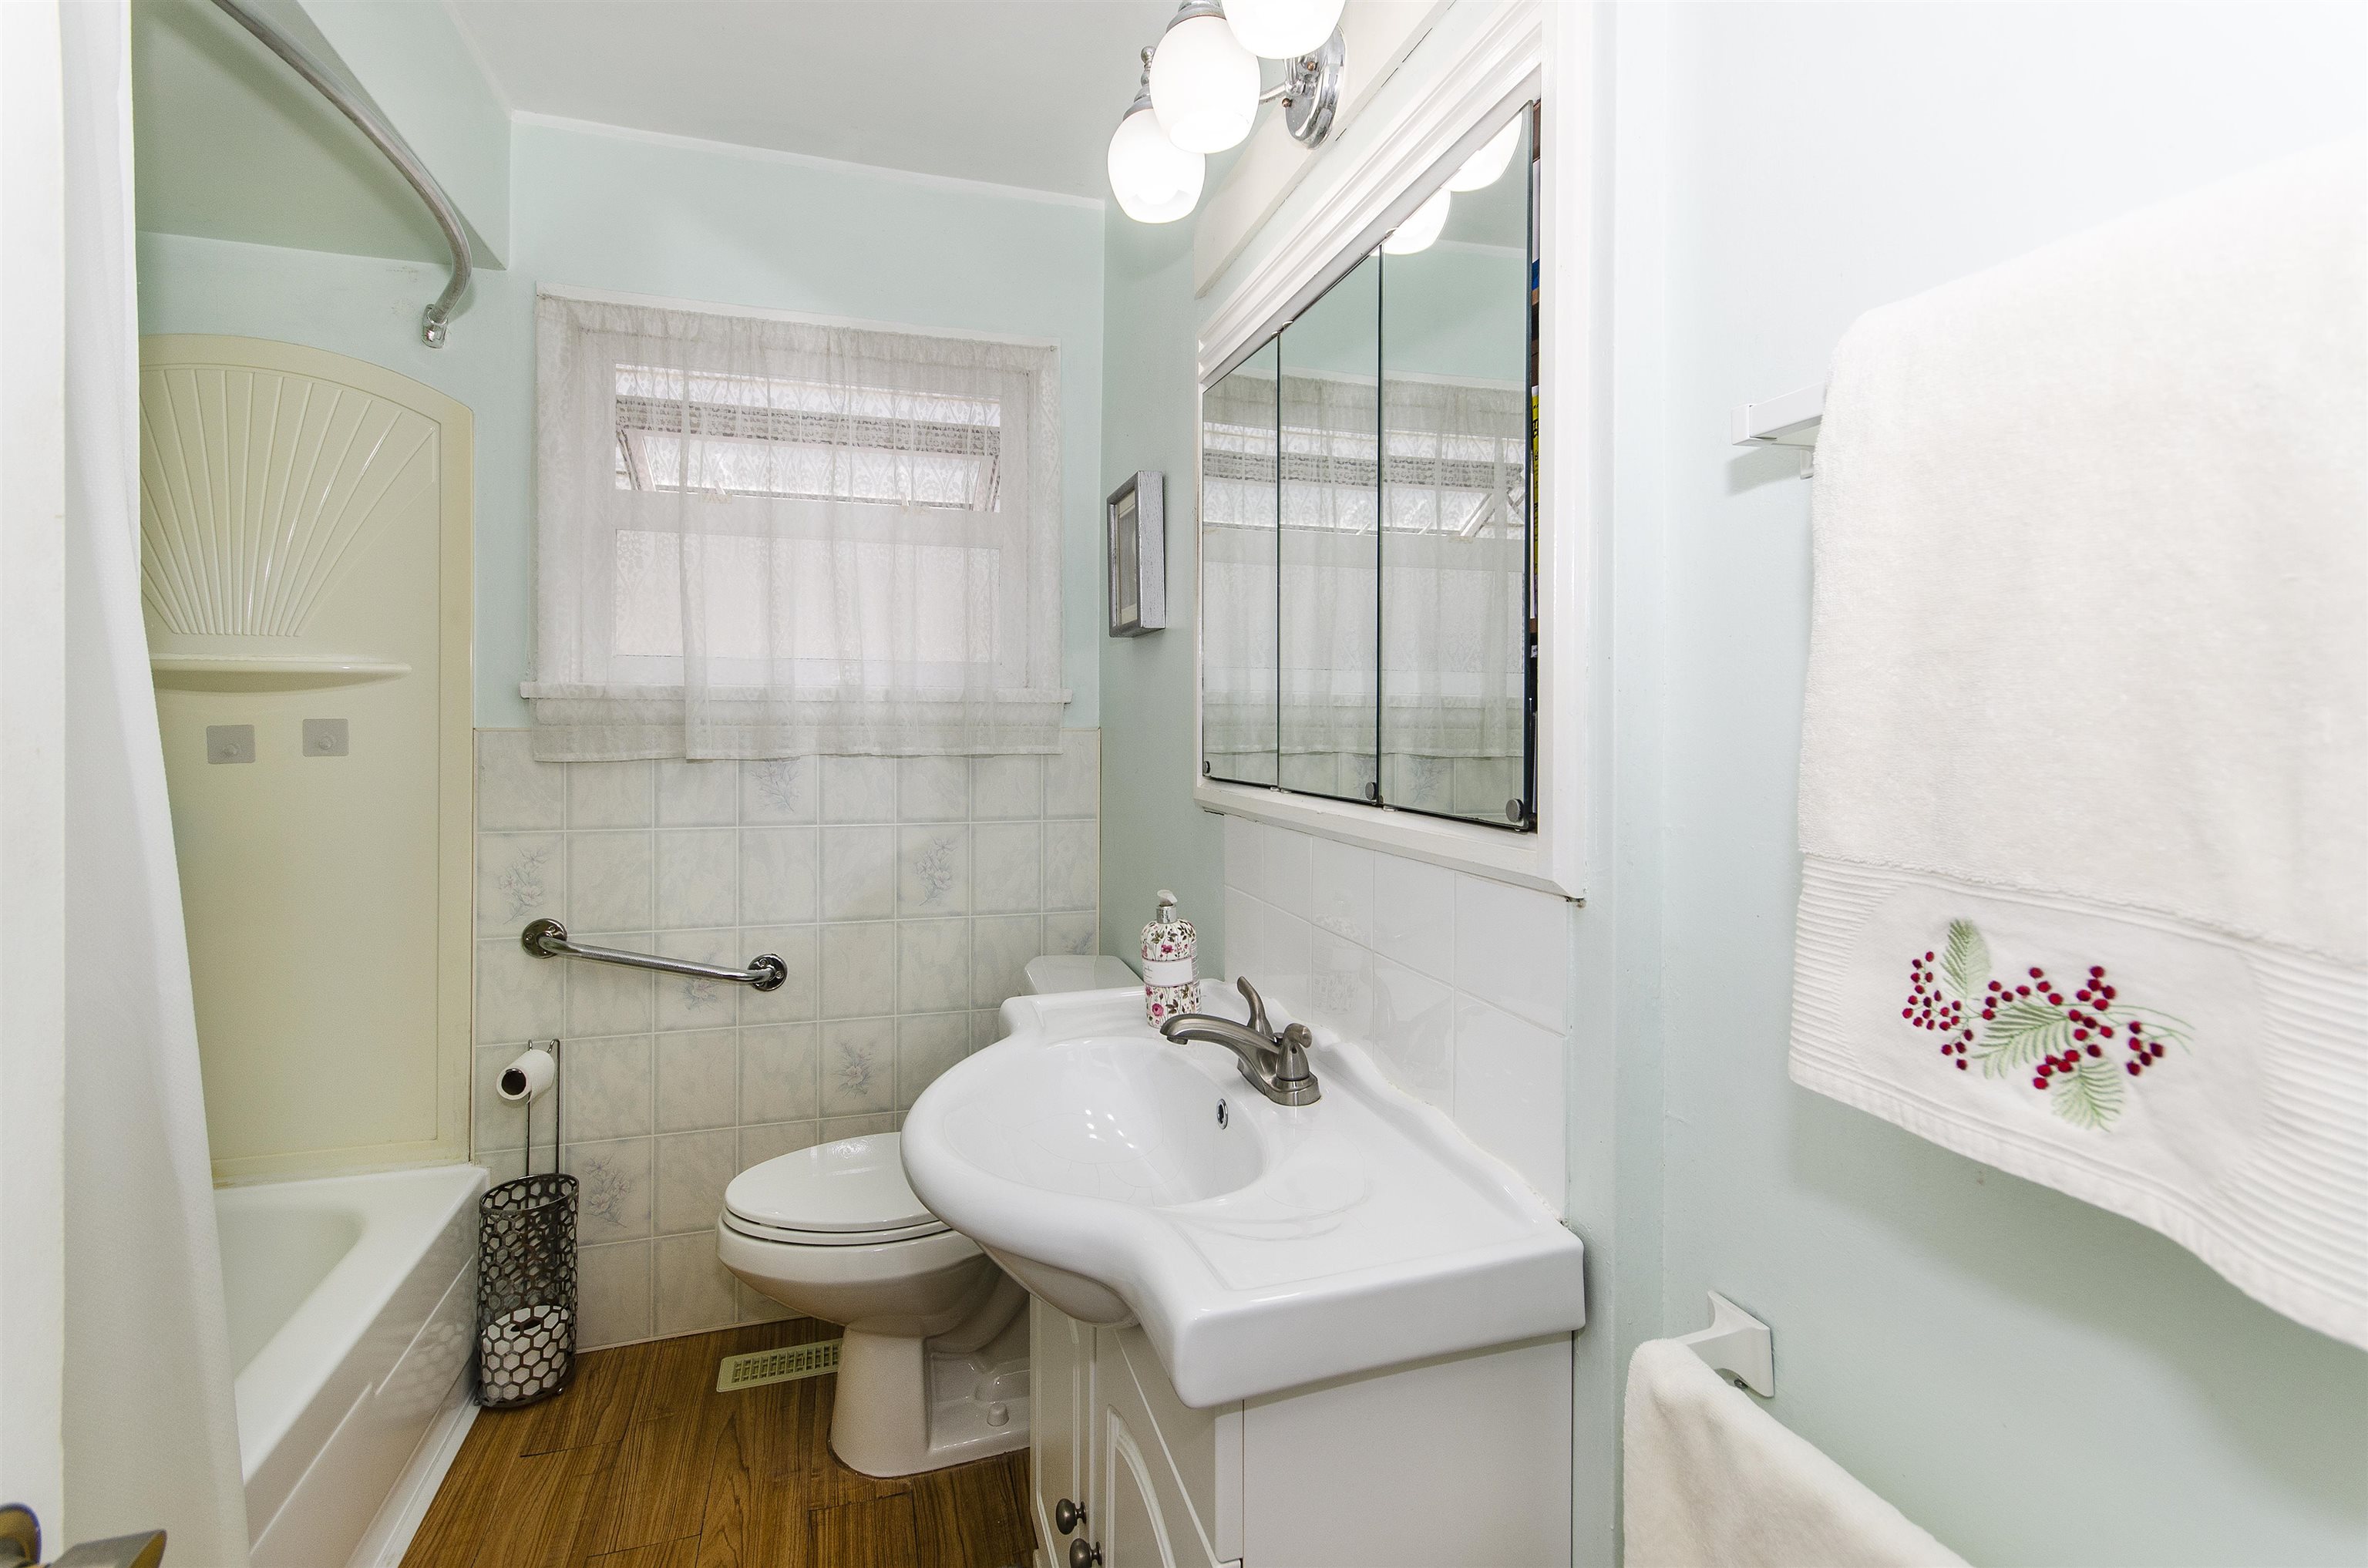 Listing image of 234 W 23RD STREET